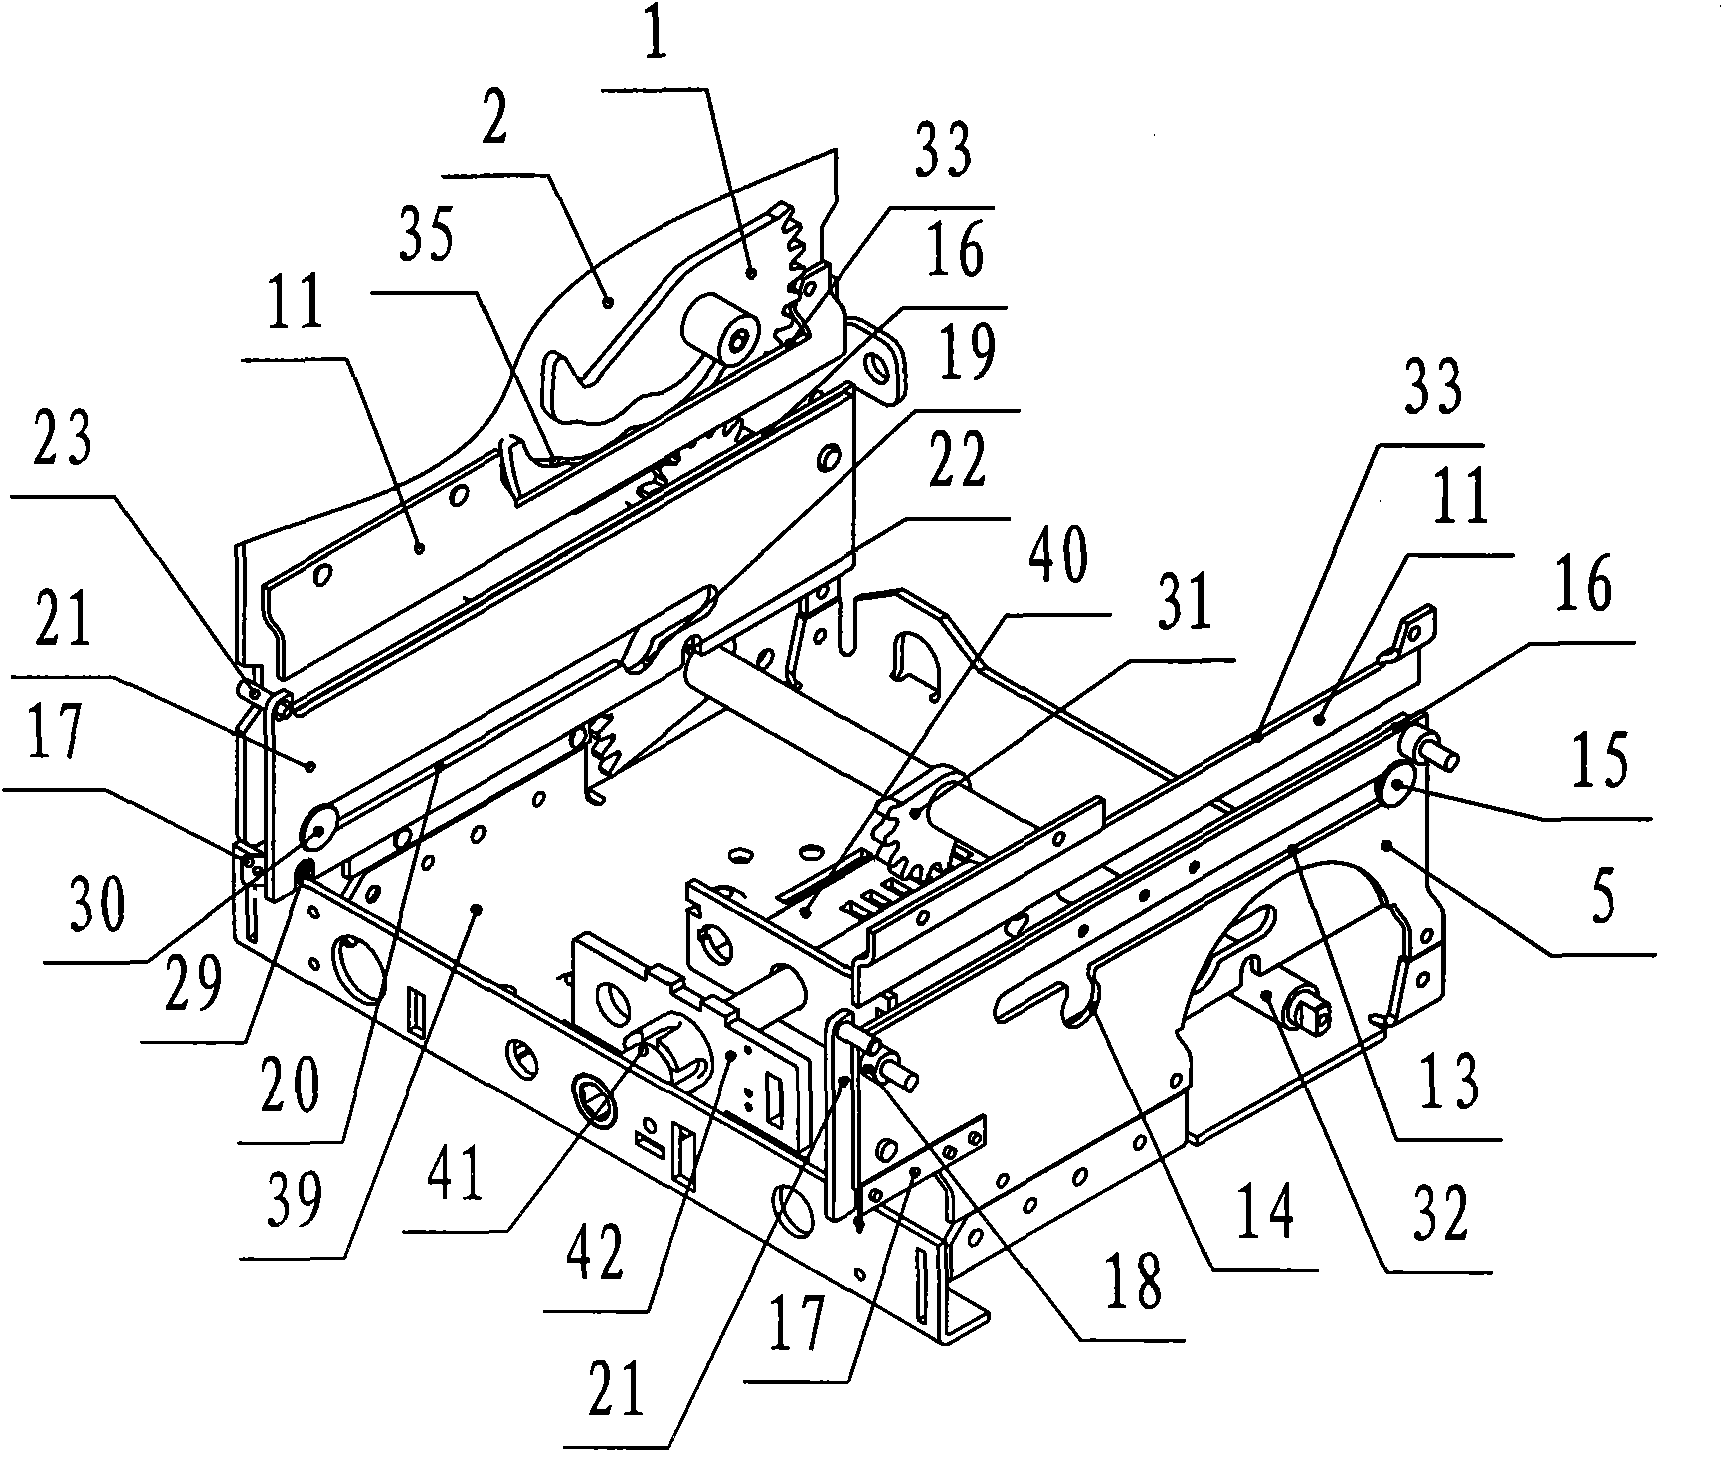 Draw-out device